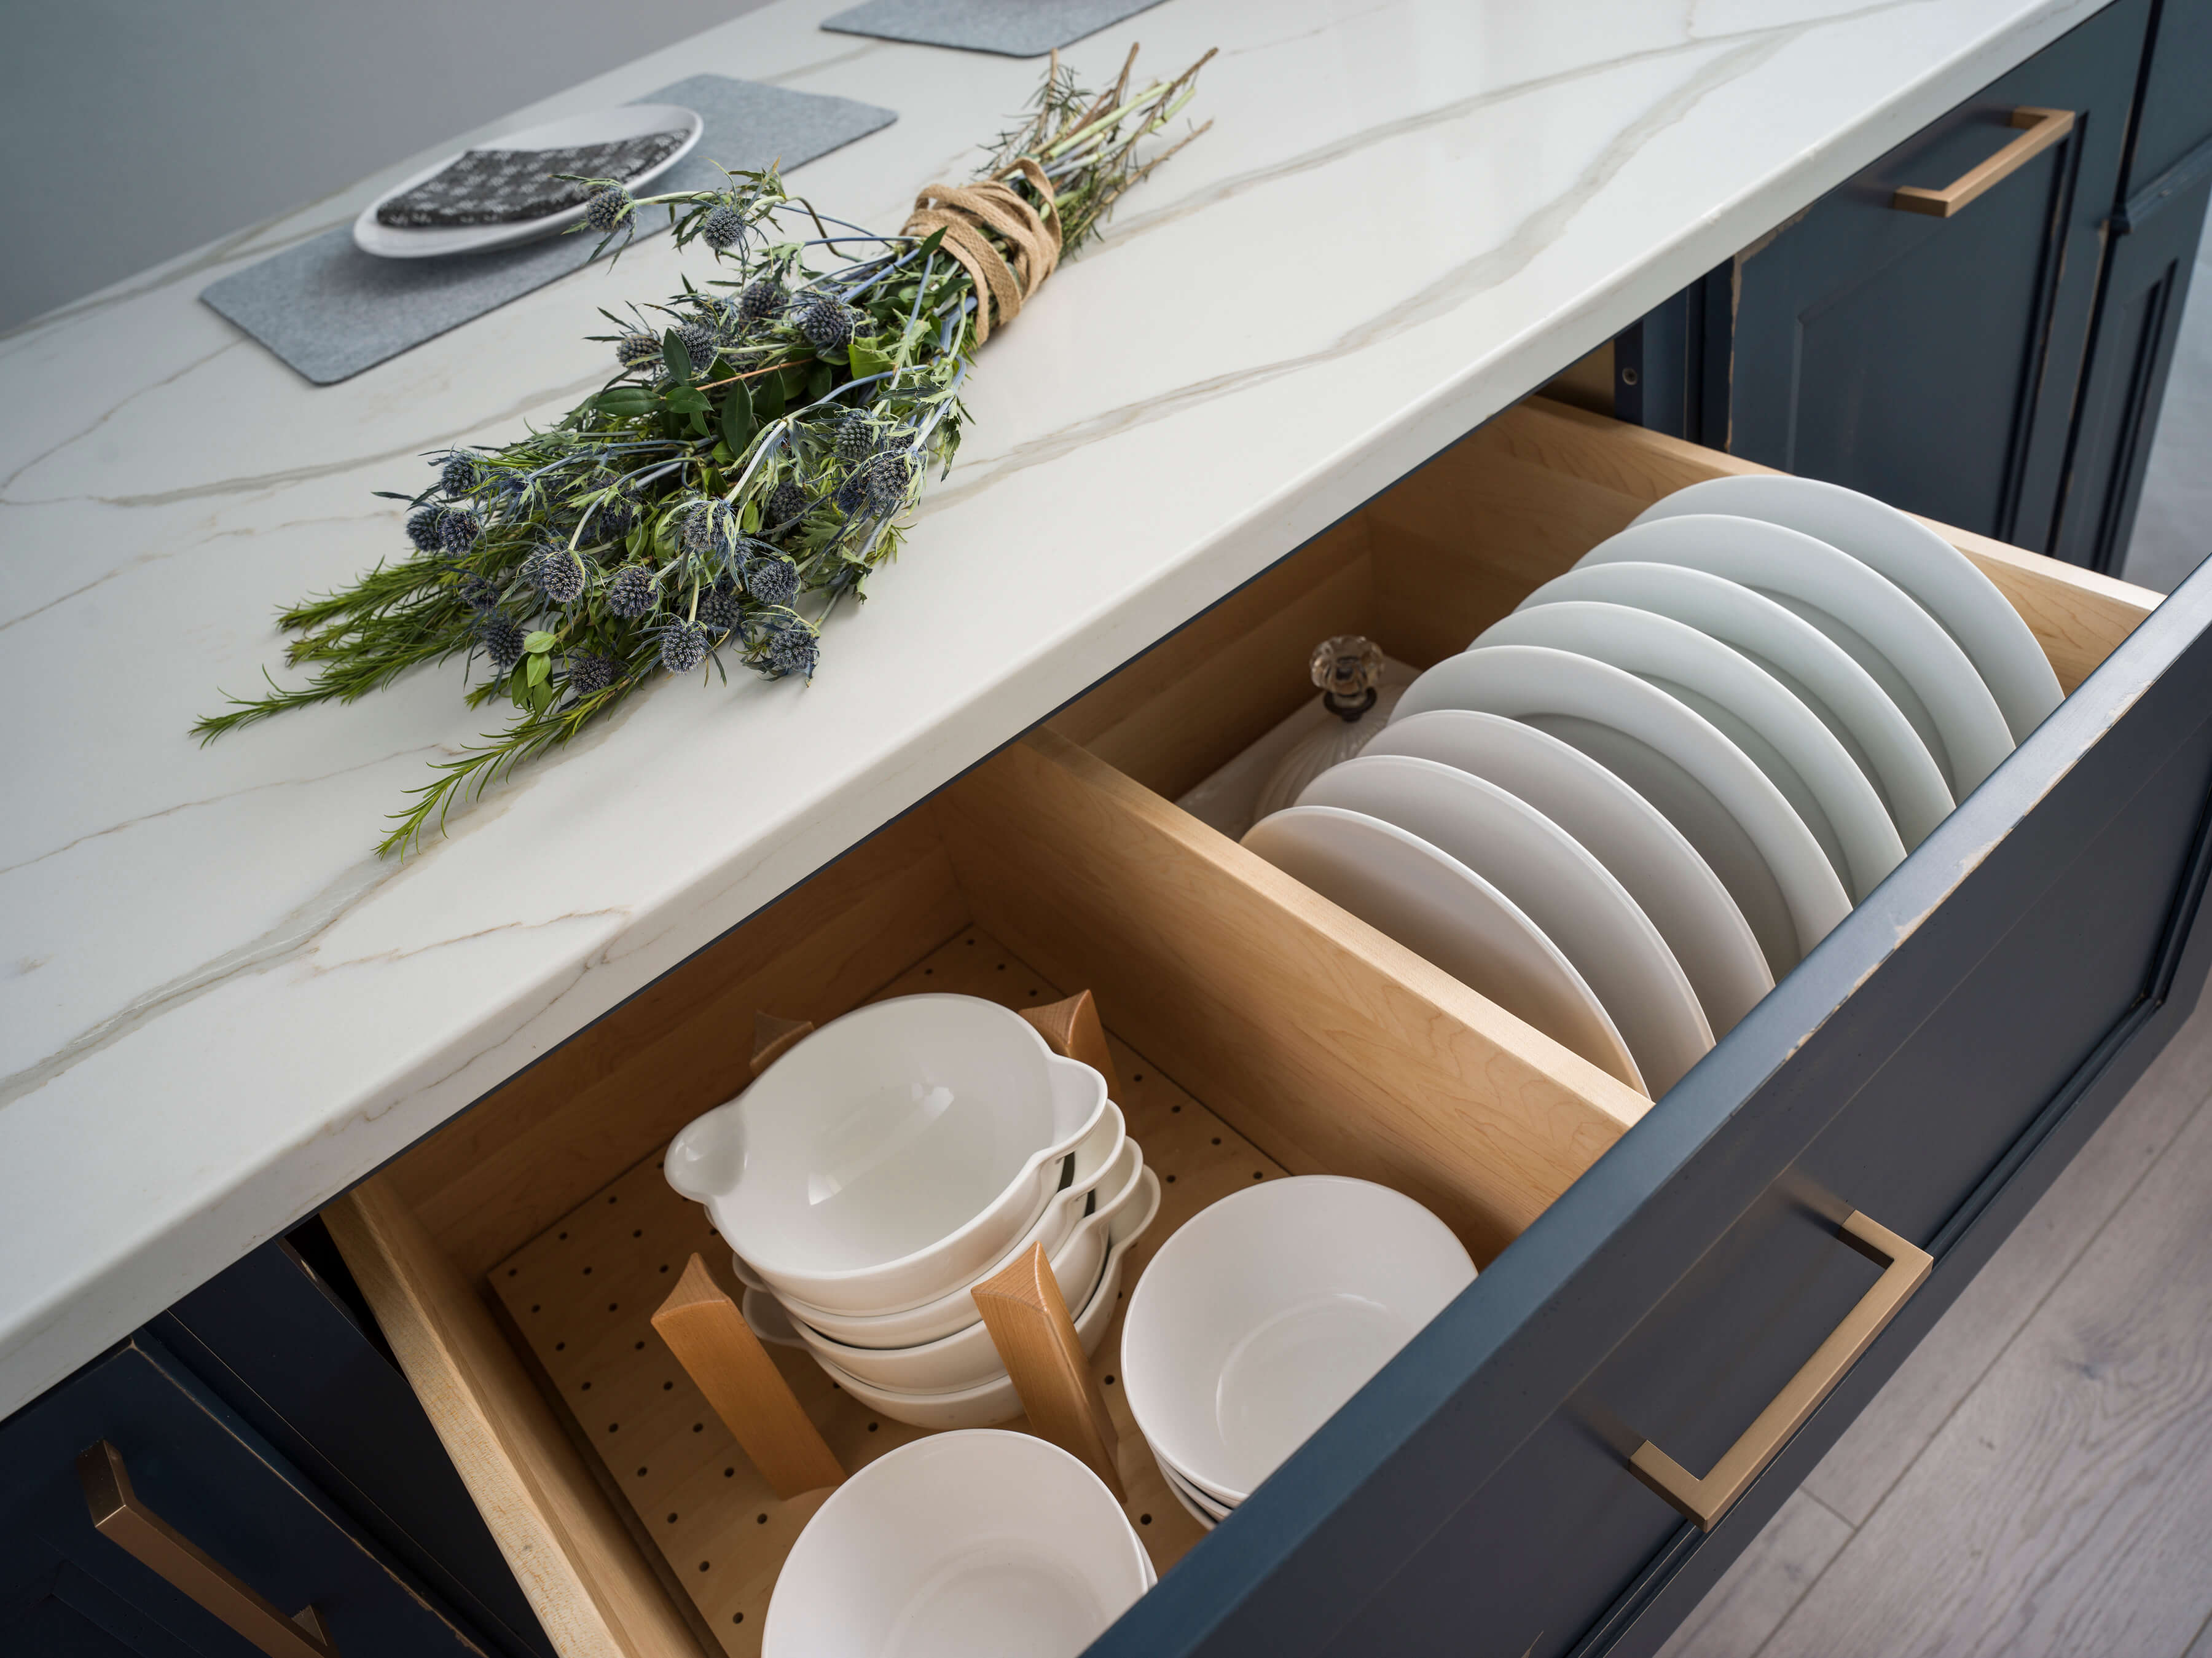 Dura Supreme’s Plate Rack combined with the Dish Storage Drawer creates a convenient spot to neatly store and organize an entire set of dishware. Storing your dishware collection below the countertop creates a more accessible option for all family members.